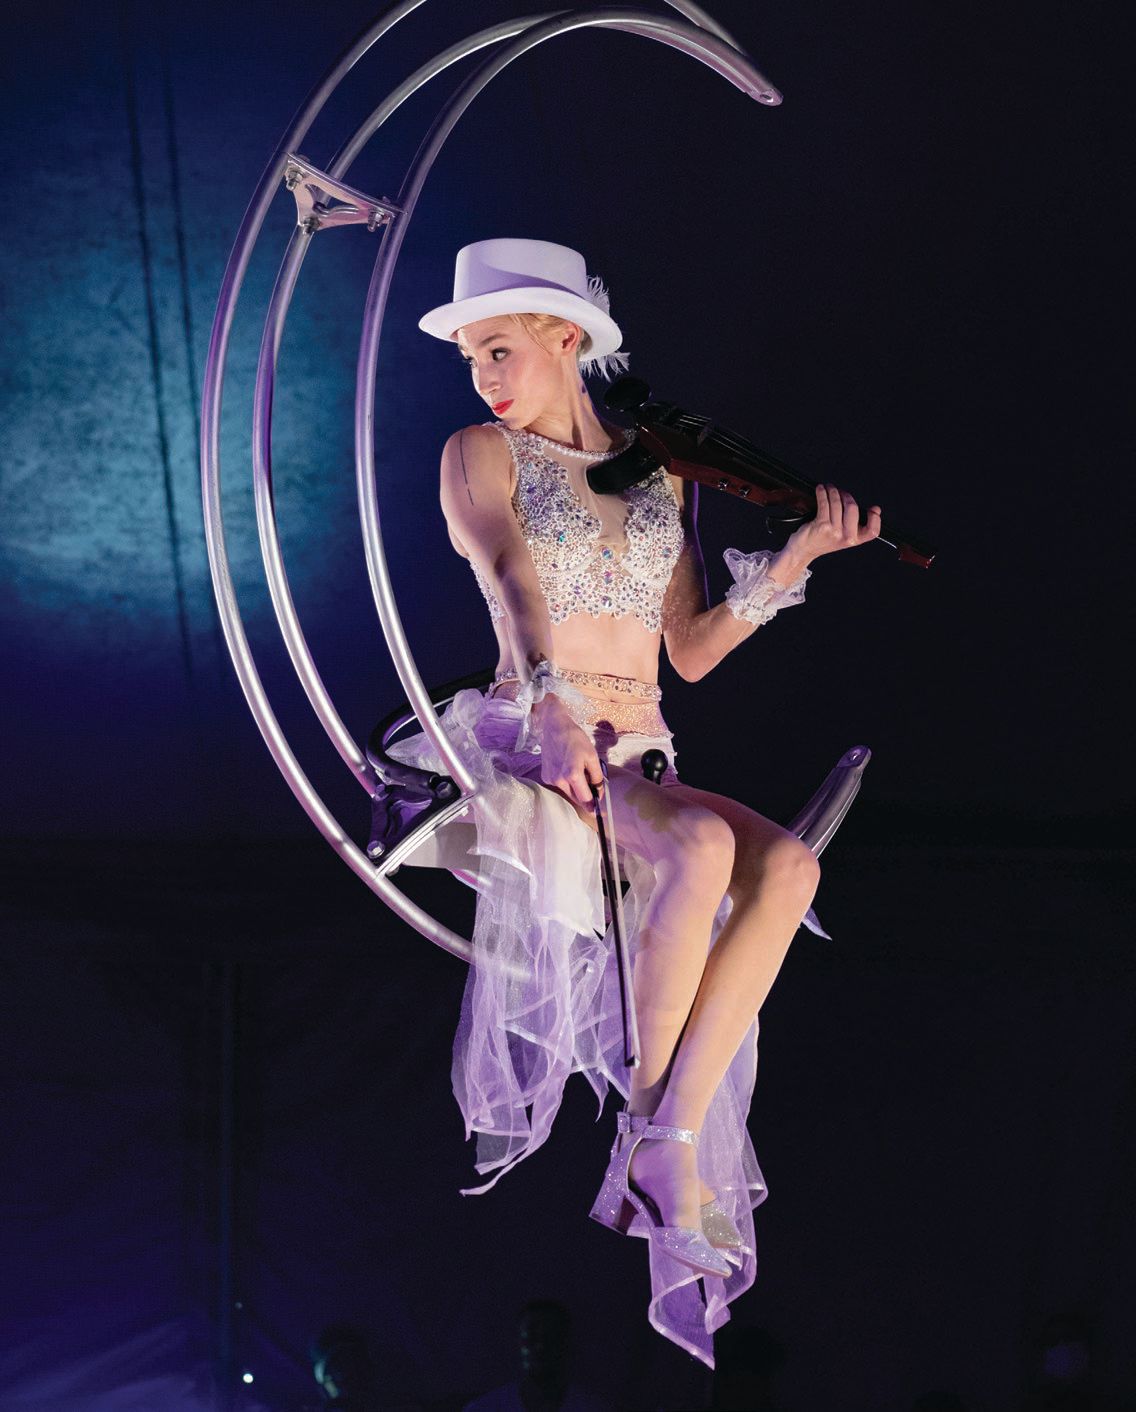 Running Thursday to Sunday nights this summer, Cirque Risqué is sure to thrill with comedians, contortionists and more. PHOTO COURTESY OF; SHOWBOAT HOTEL 194